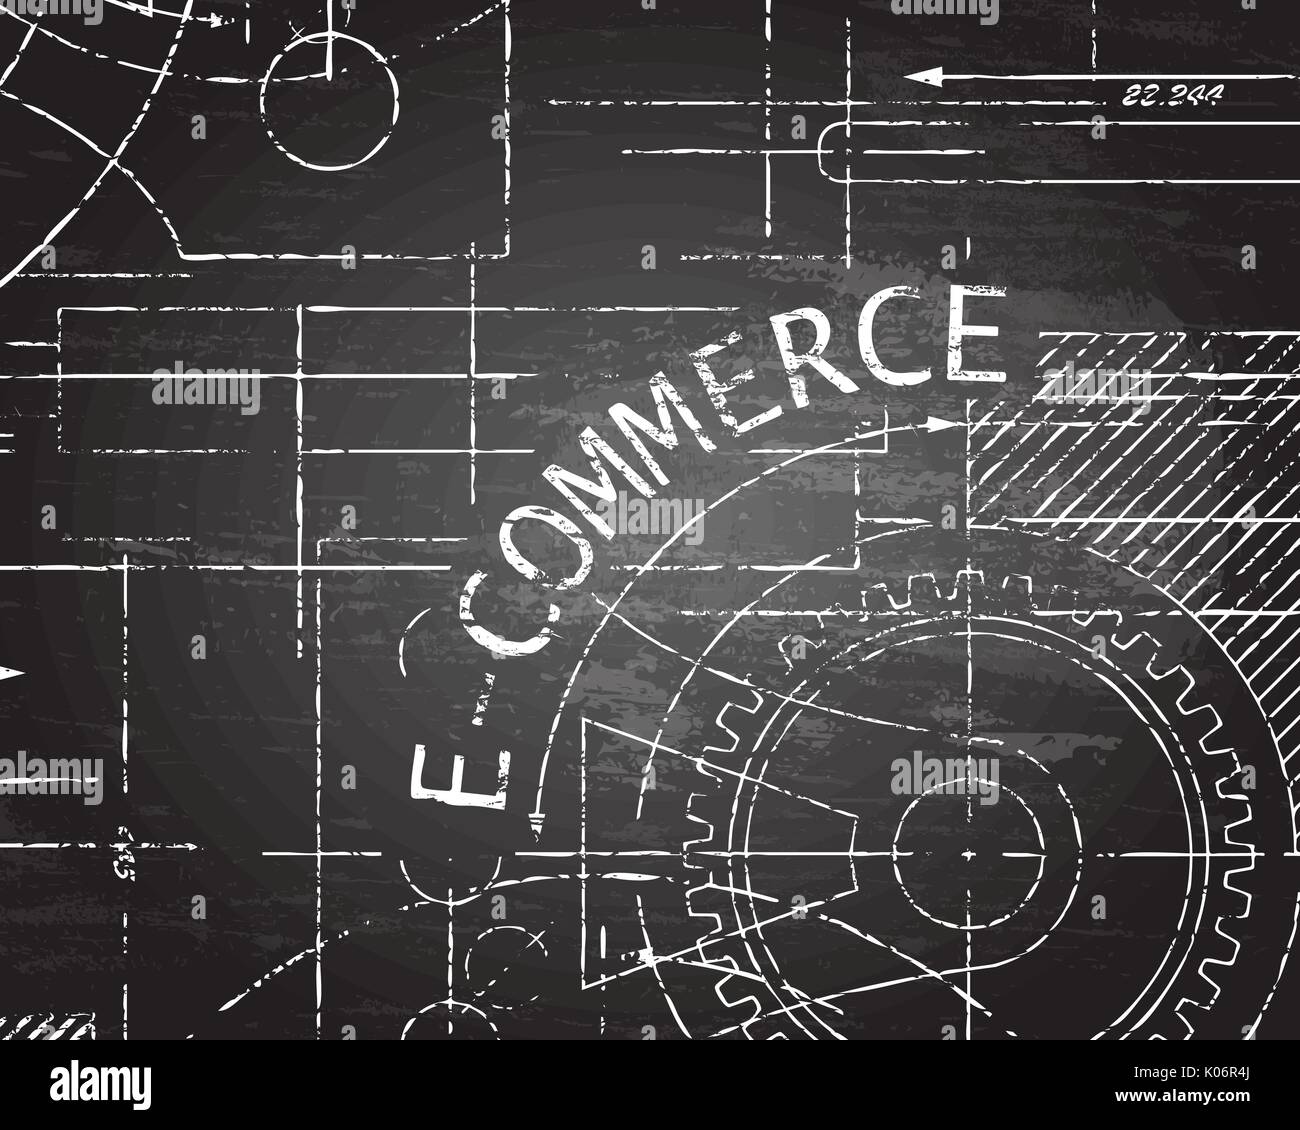 E Commerce word with gear wheels on machine blackboard background illustration Stock Vector